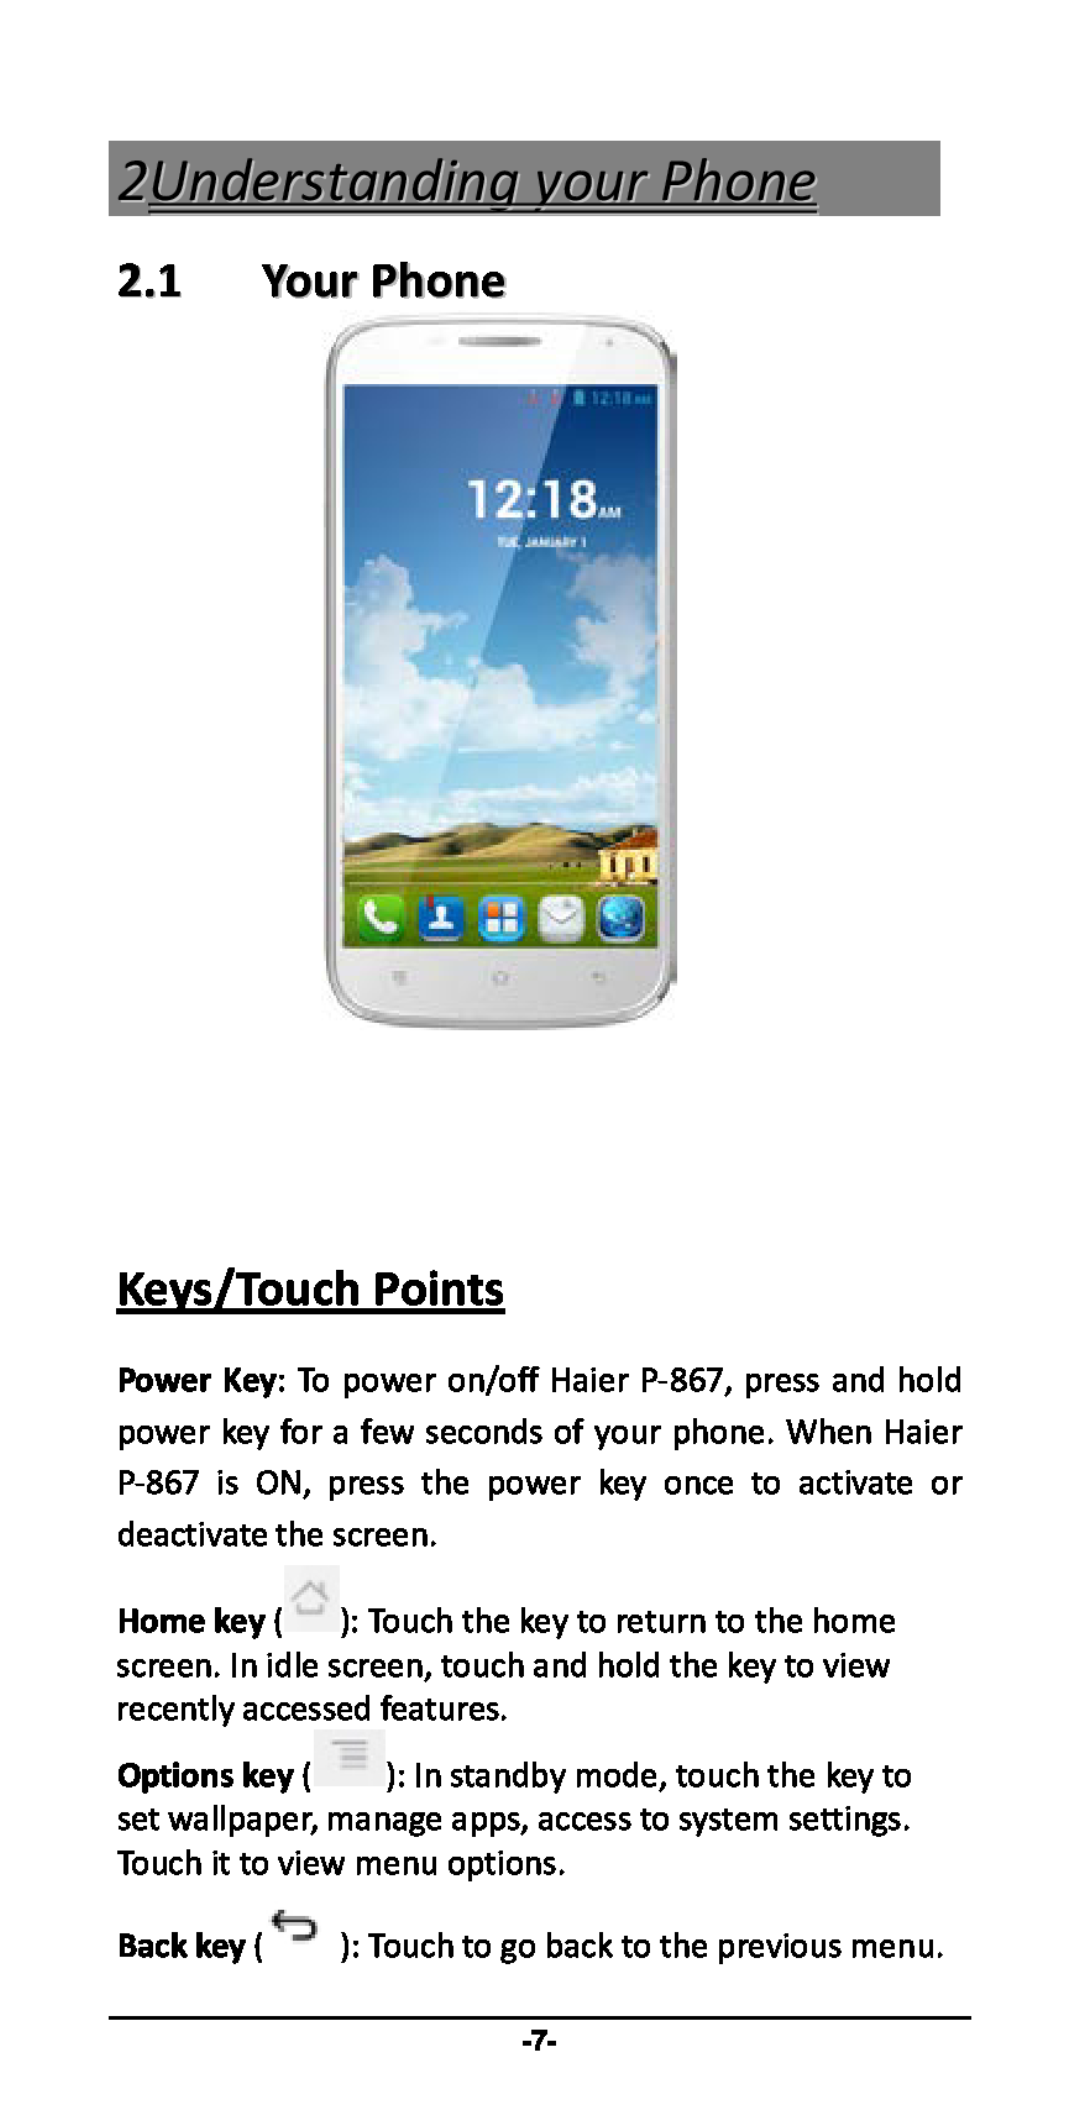 Haier P-867 user manual 2Understanding your Phone, Your Phone Keys/Touch Points 